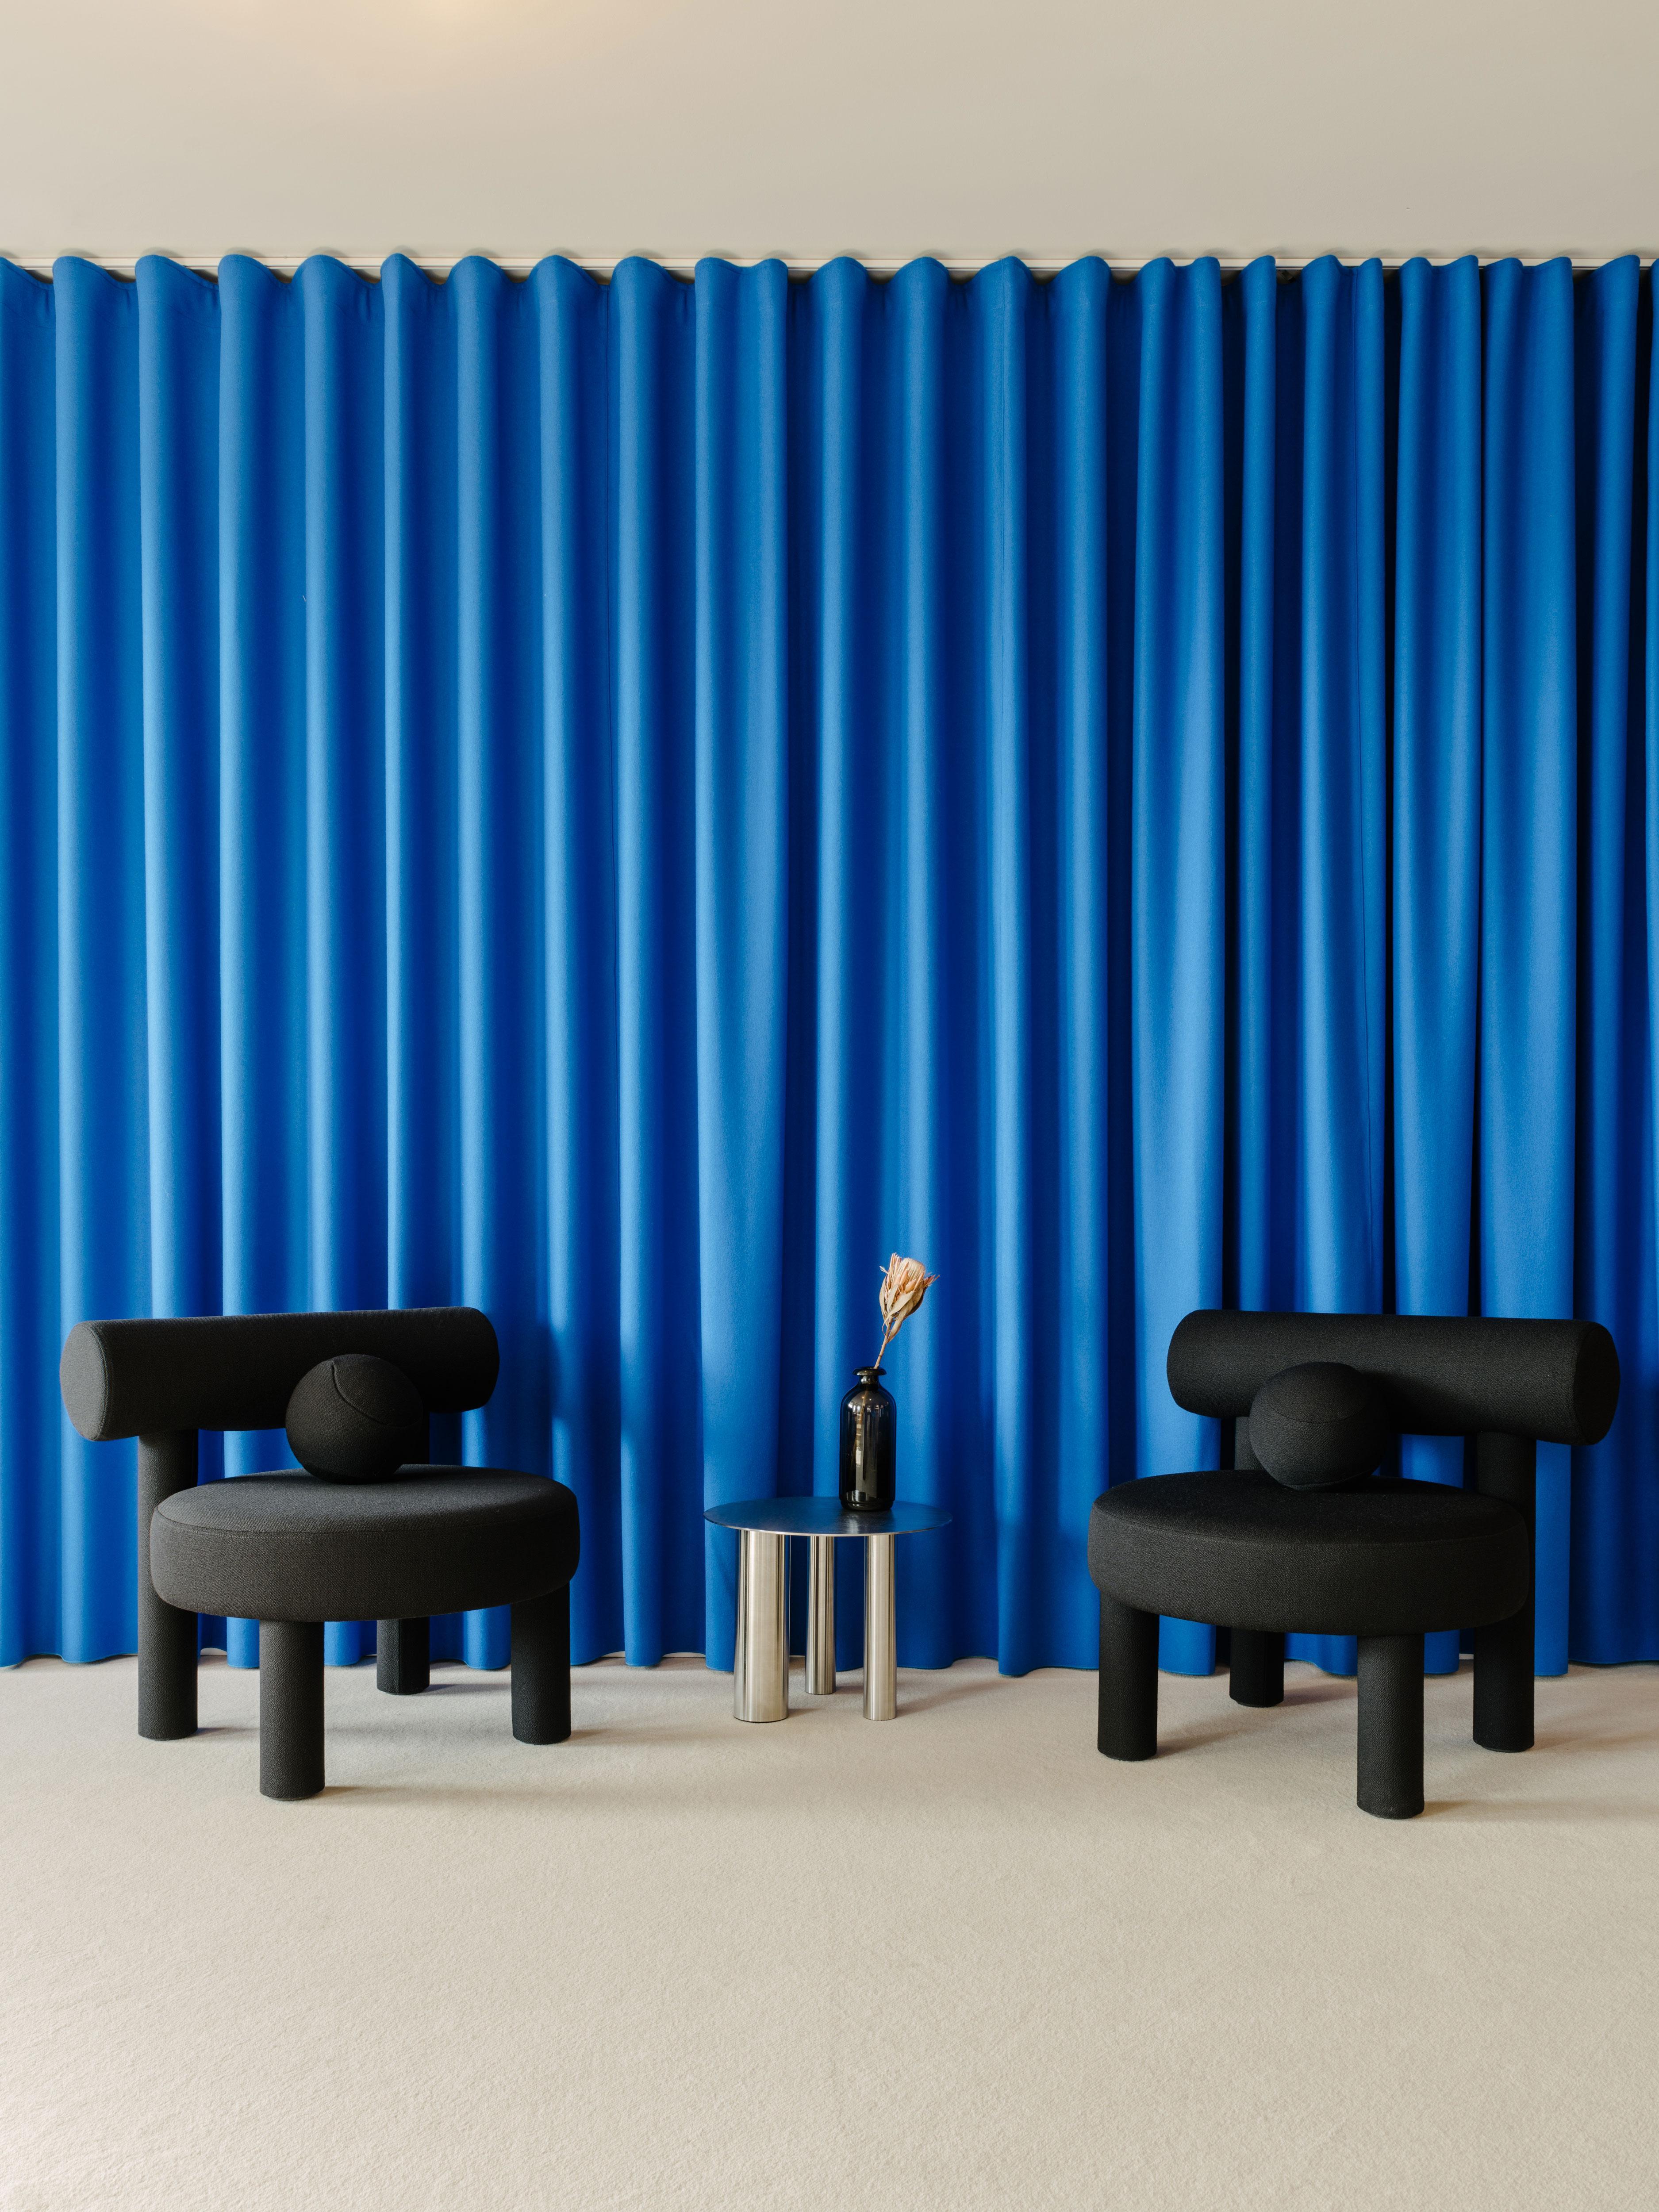 Contemporary Set 'Gropius CS1' by NOOM, 2 Low Chair in Wool Blue For Sale 1